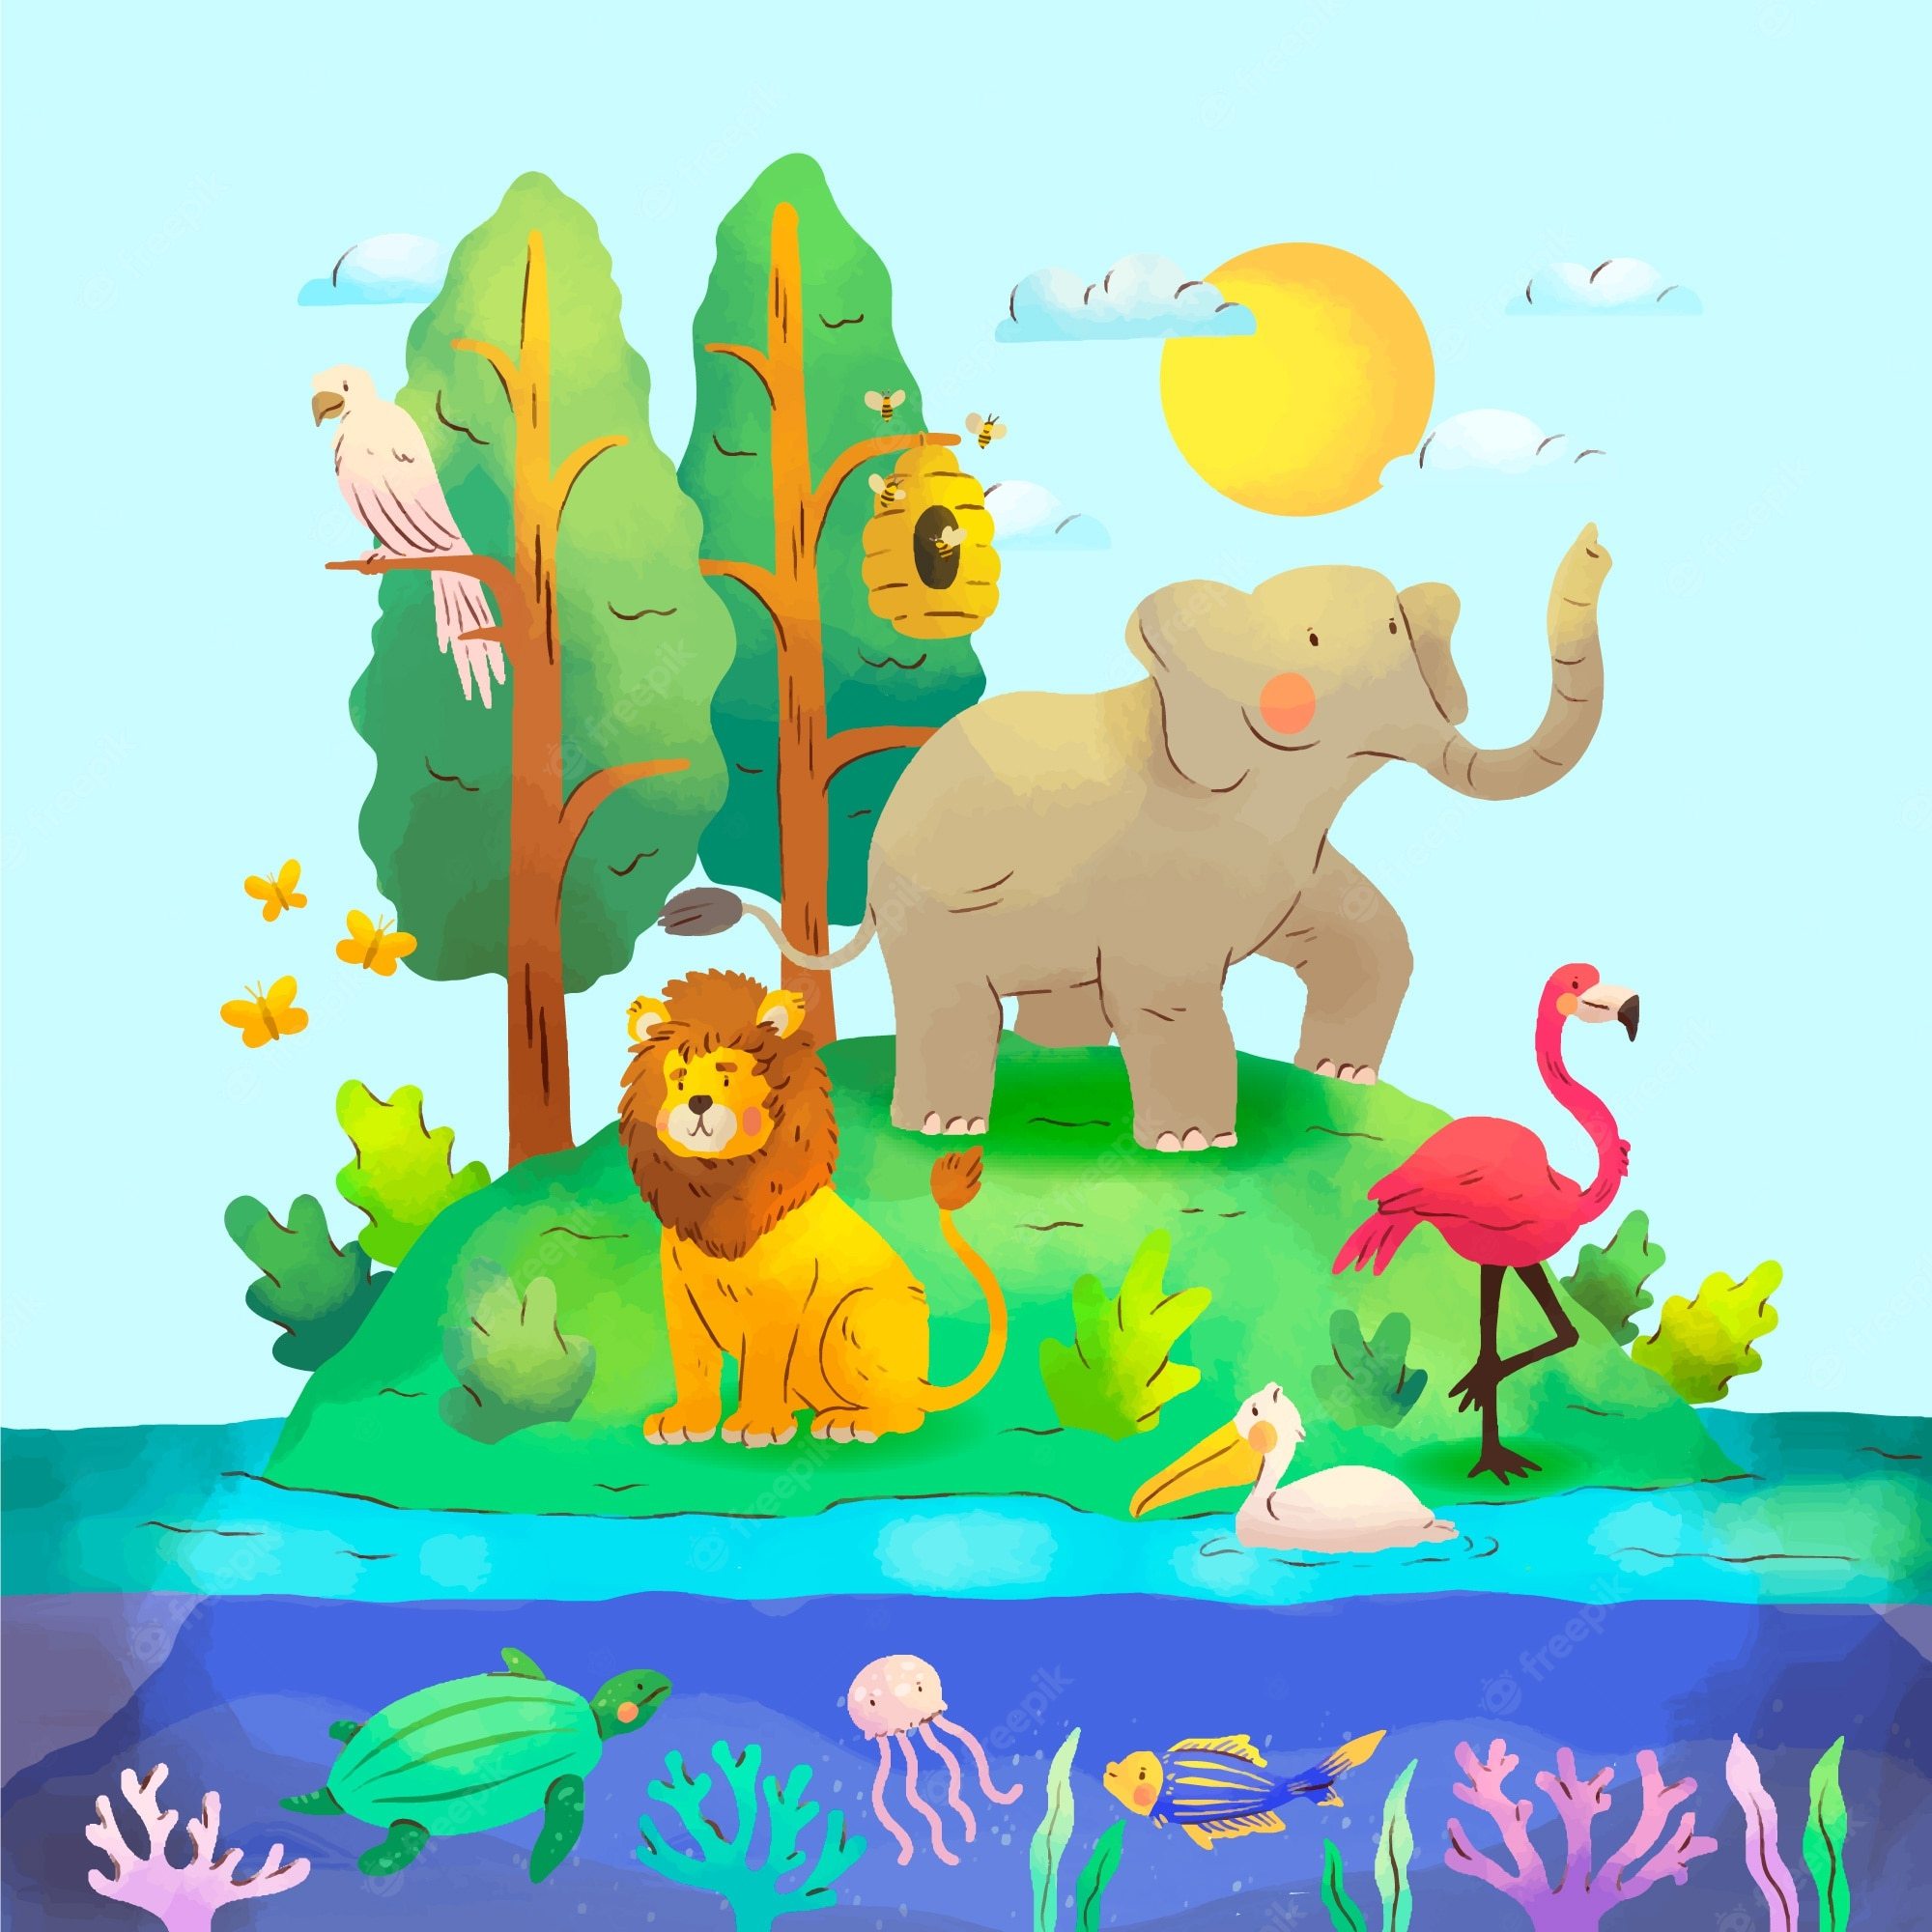 biodiversity and conservation - Class 1 - Quizizz